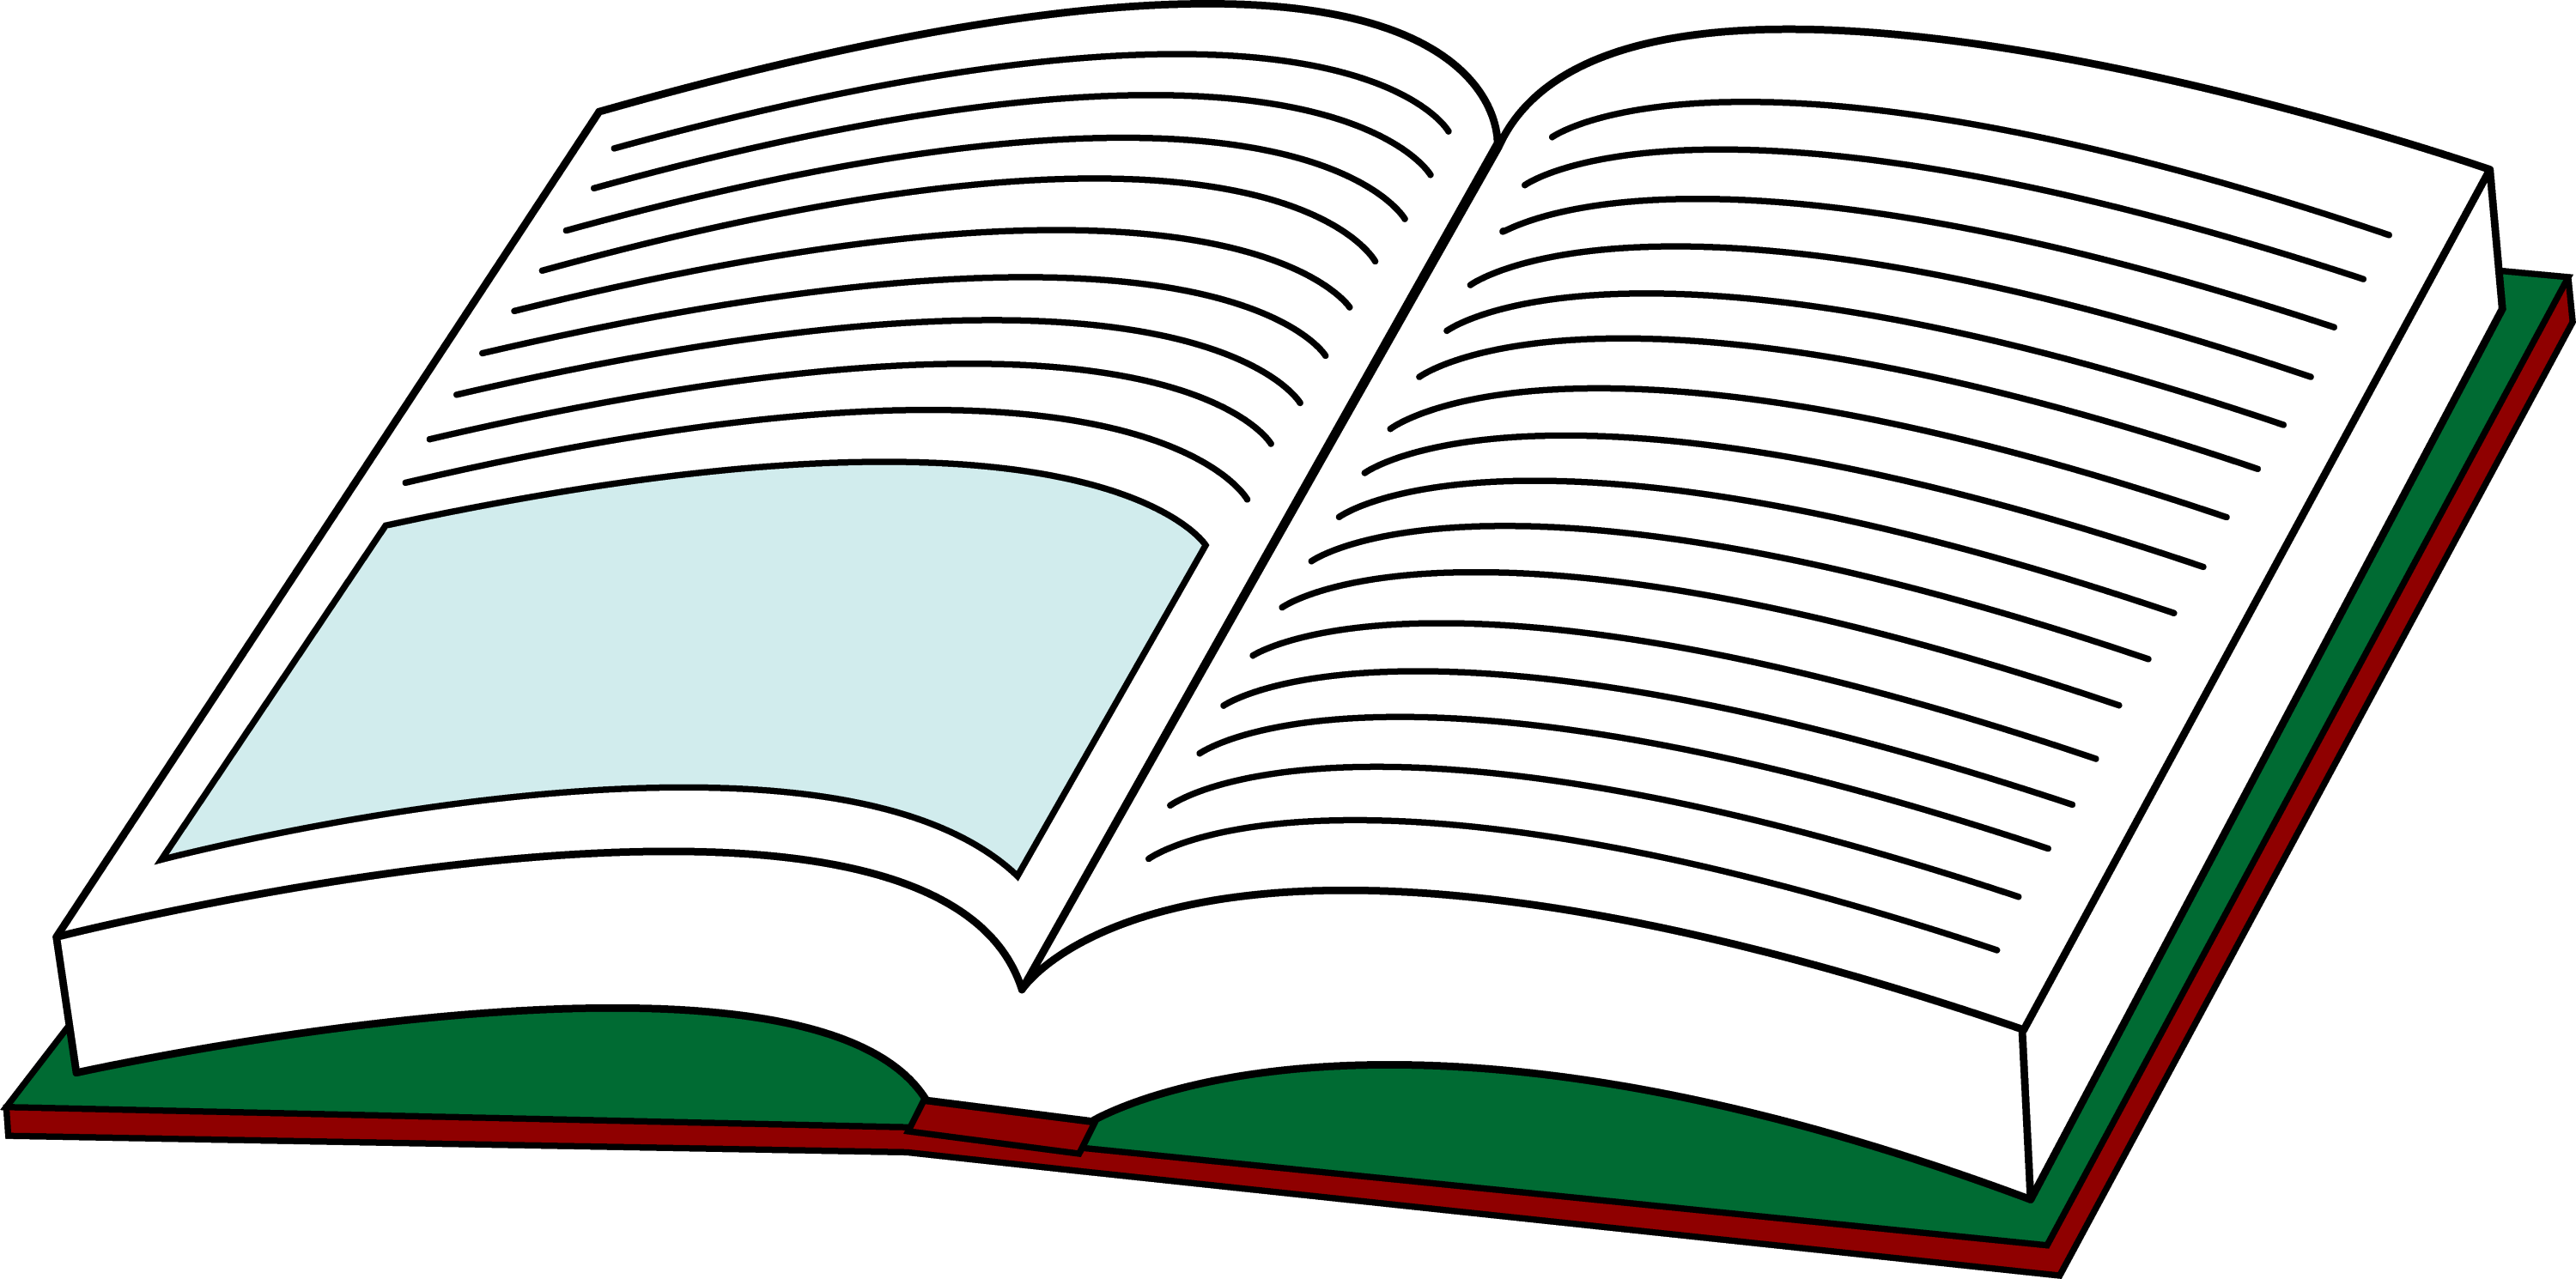 clipart images of book - photo #47